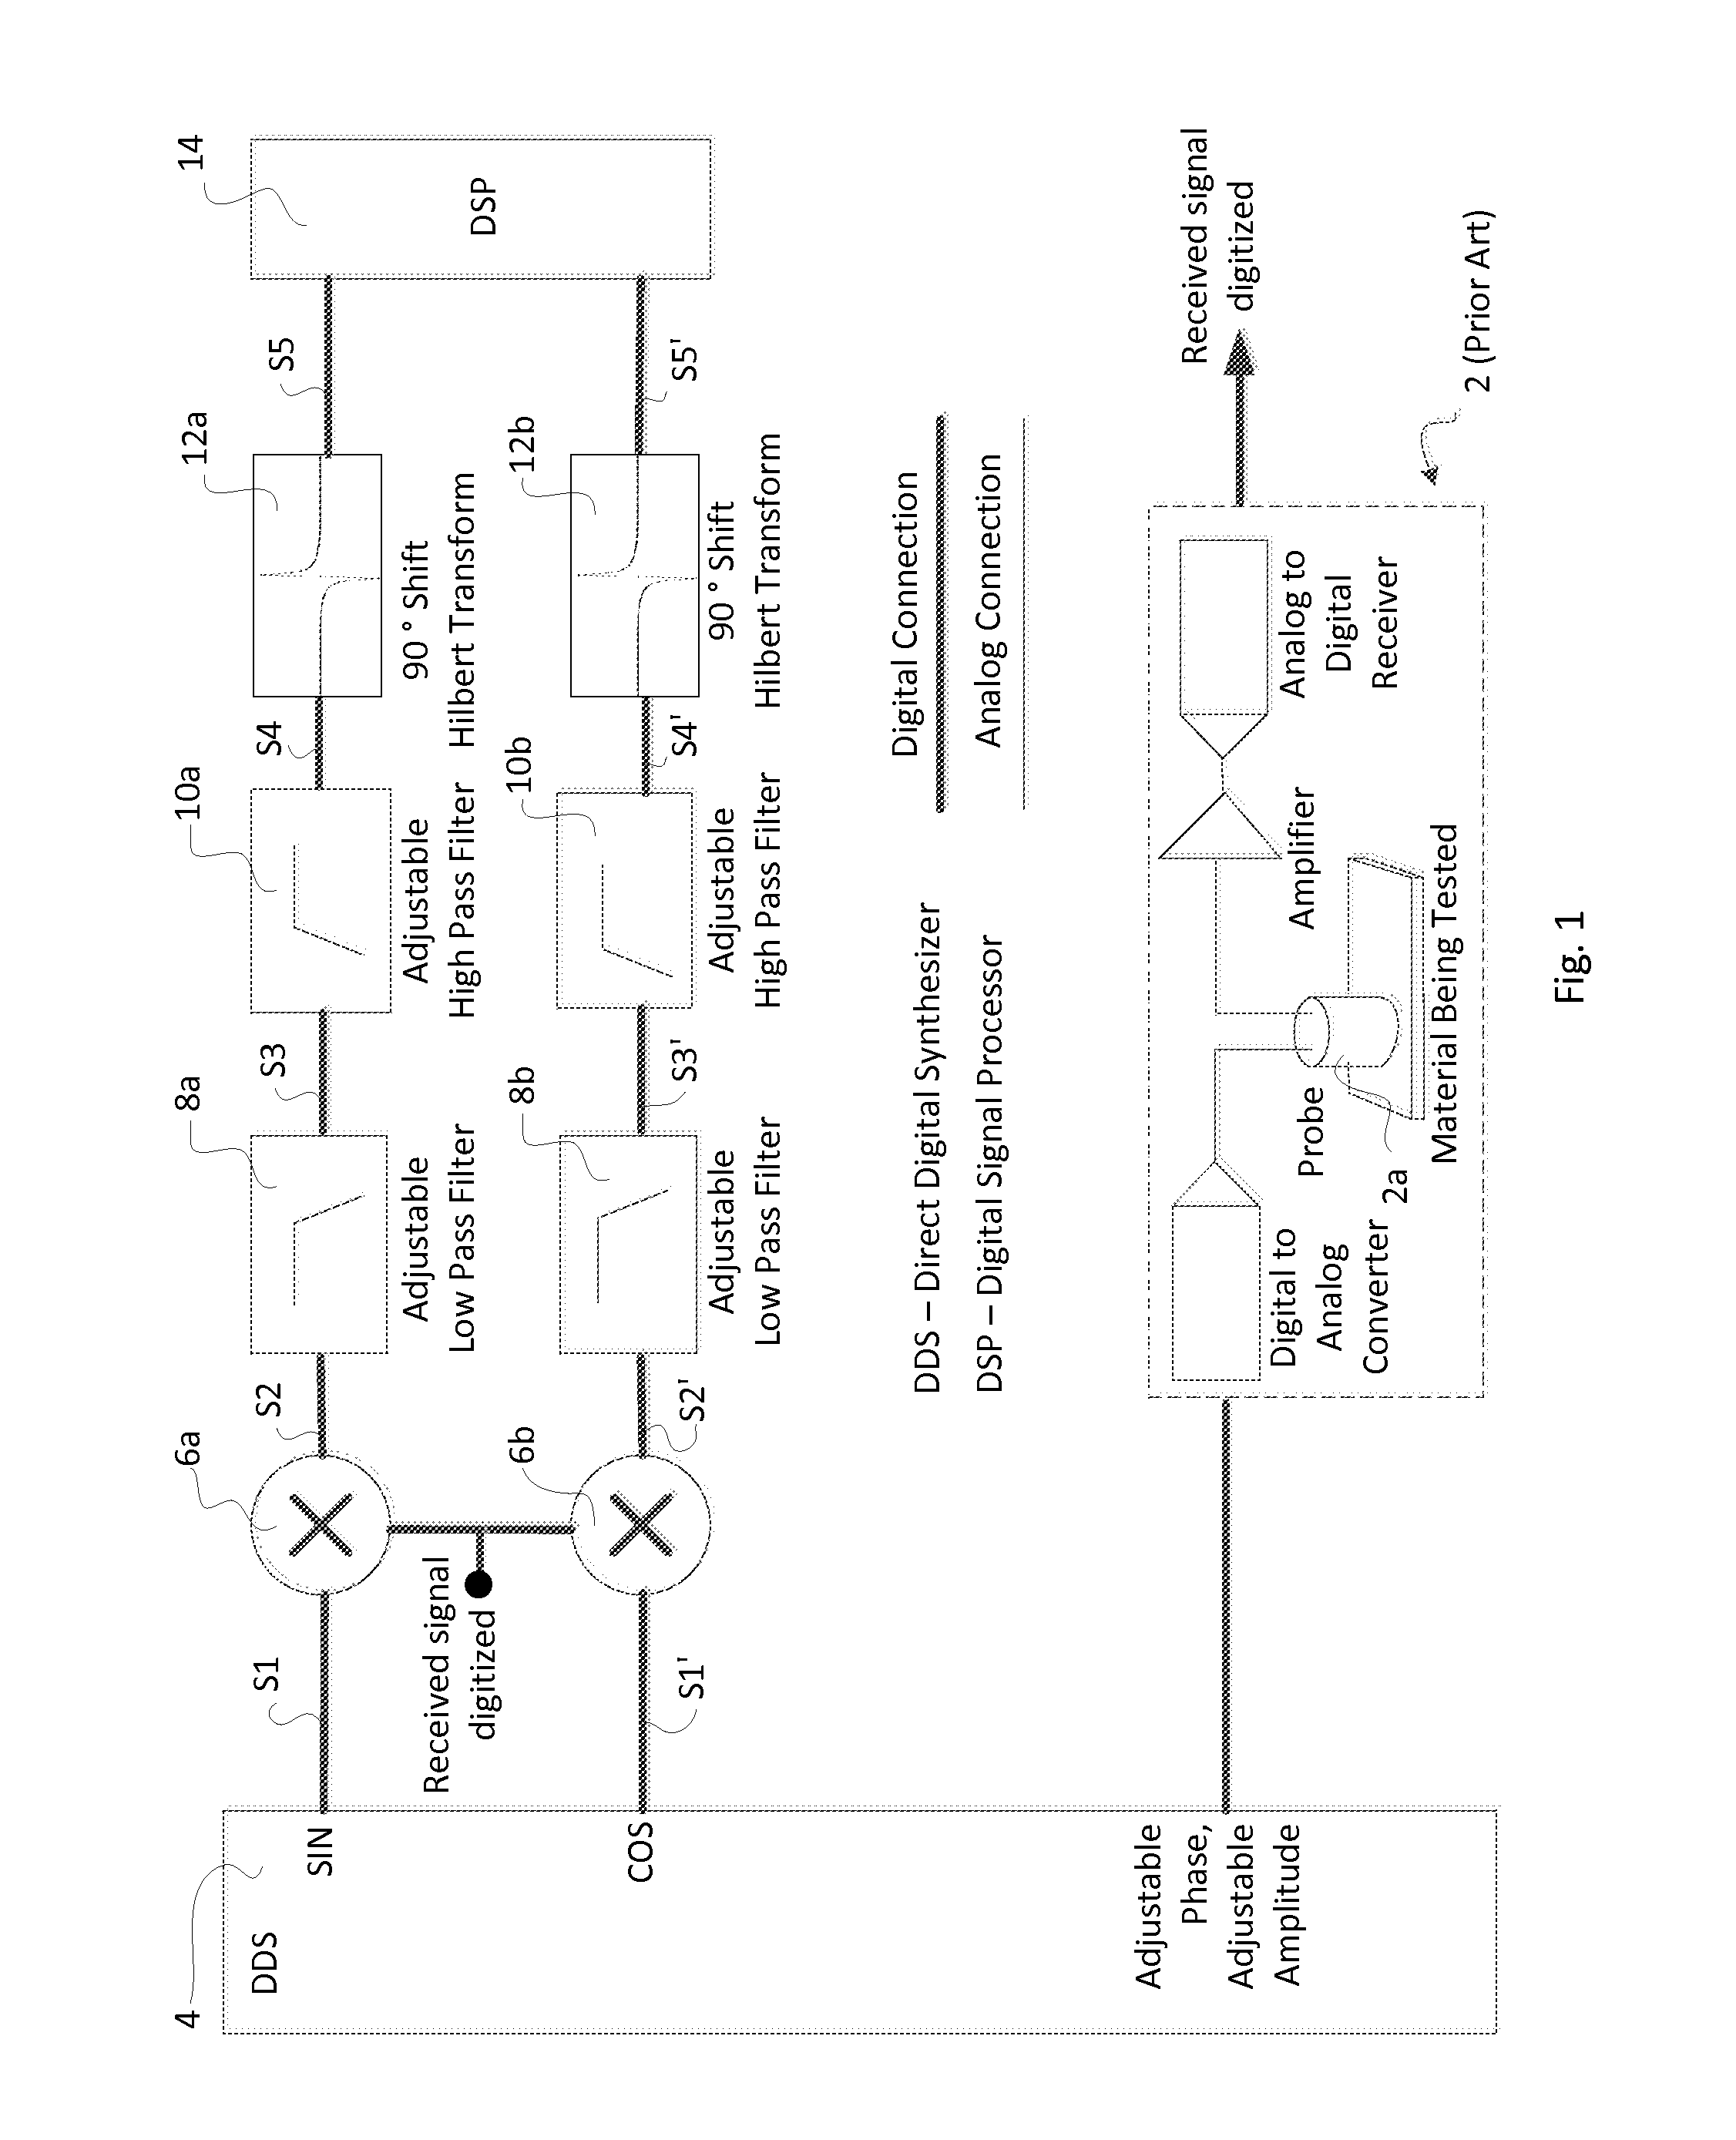 Circuit and method of providing a stable display for  eddy current instruments